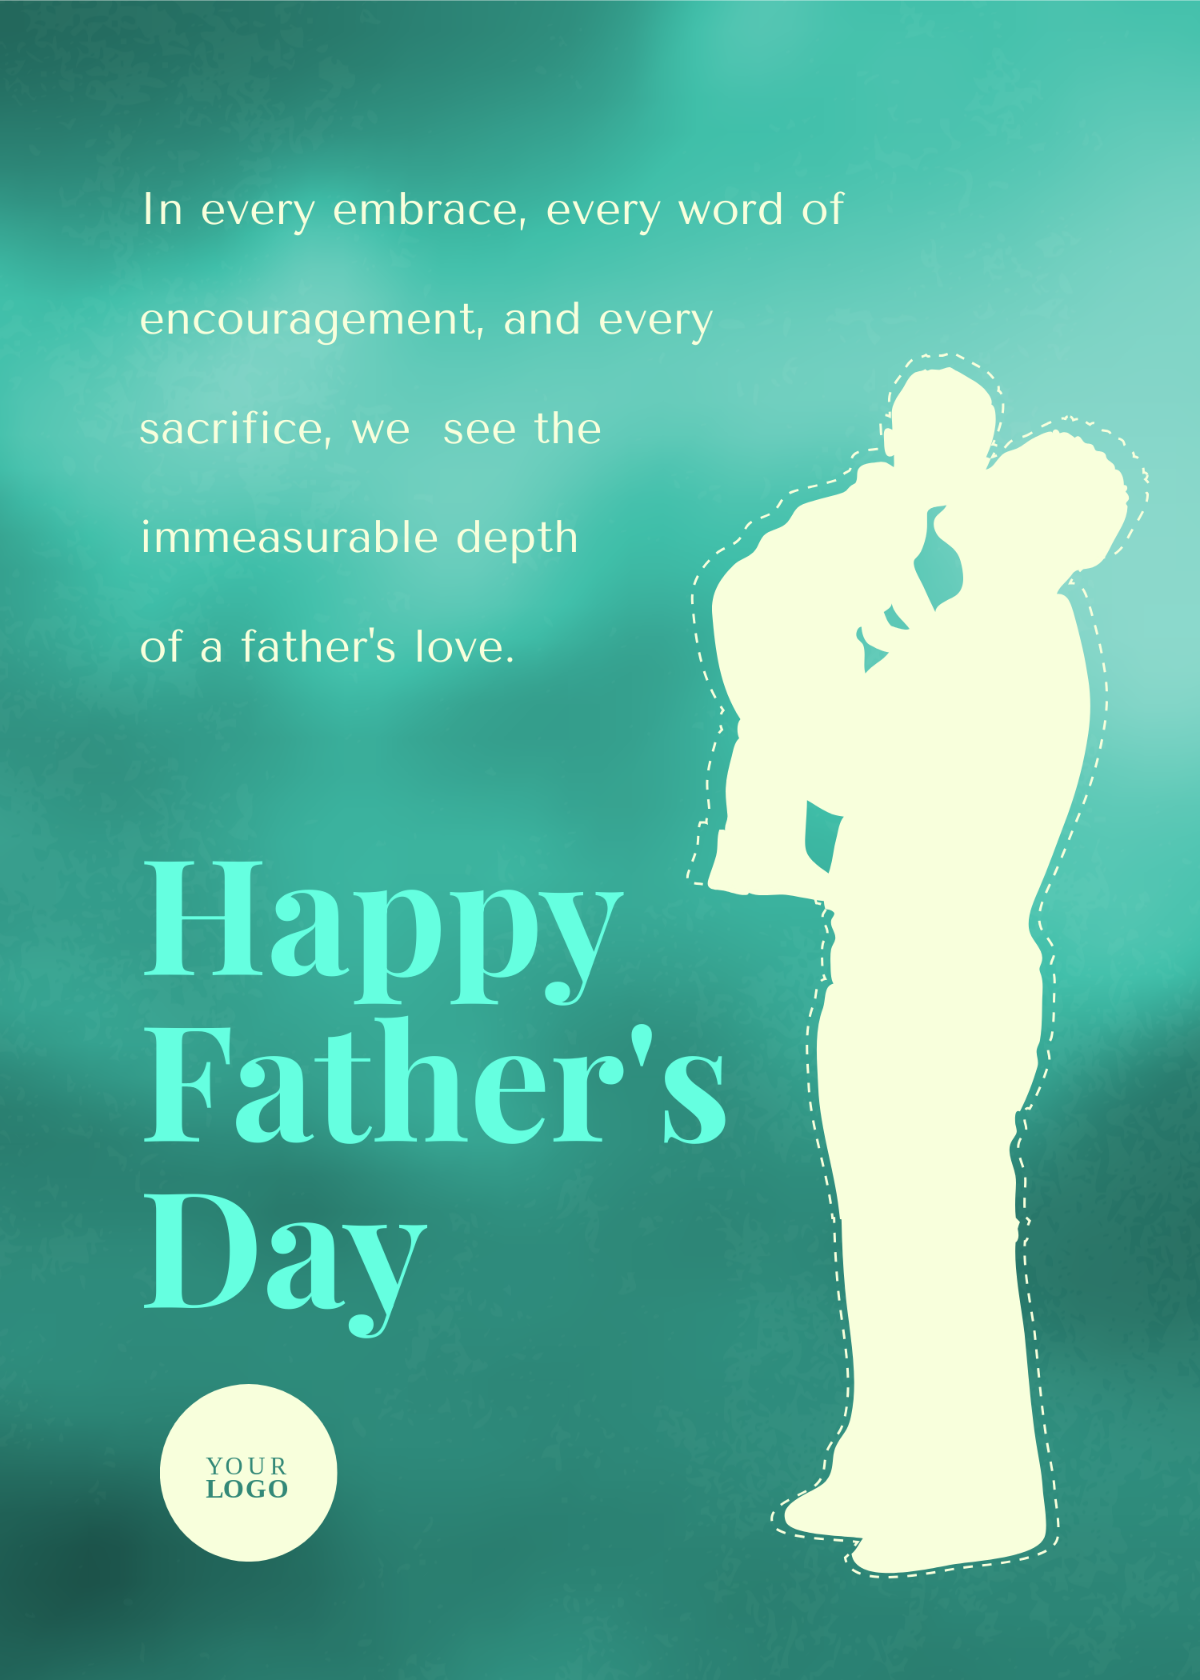 Father's Day Appreciation Message